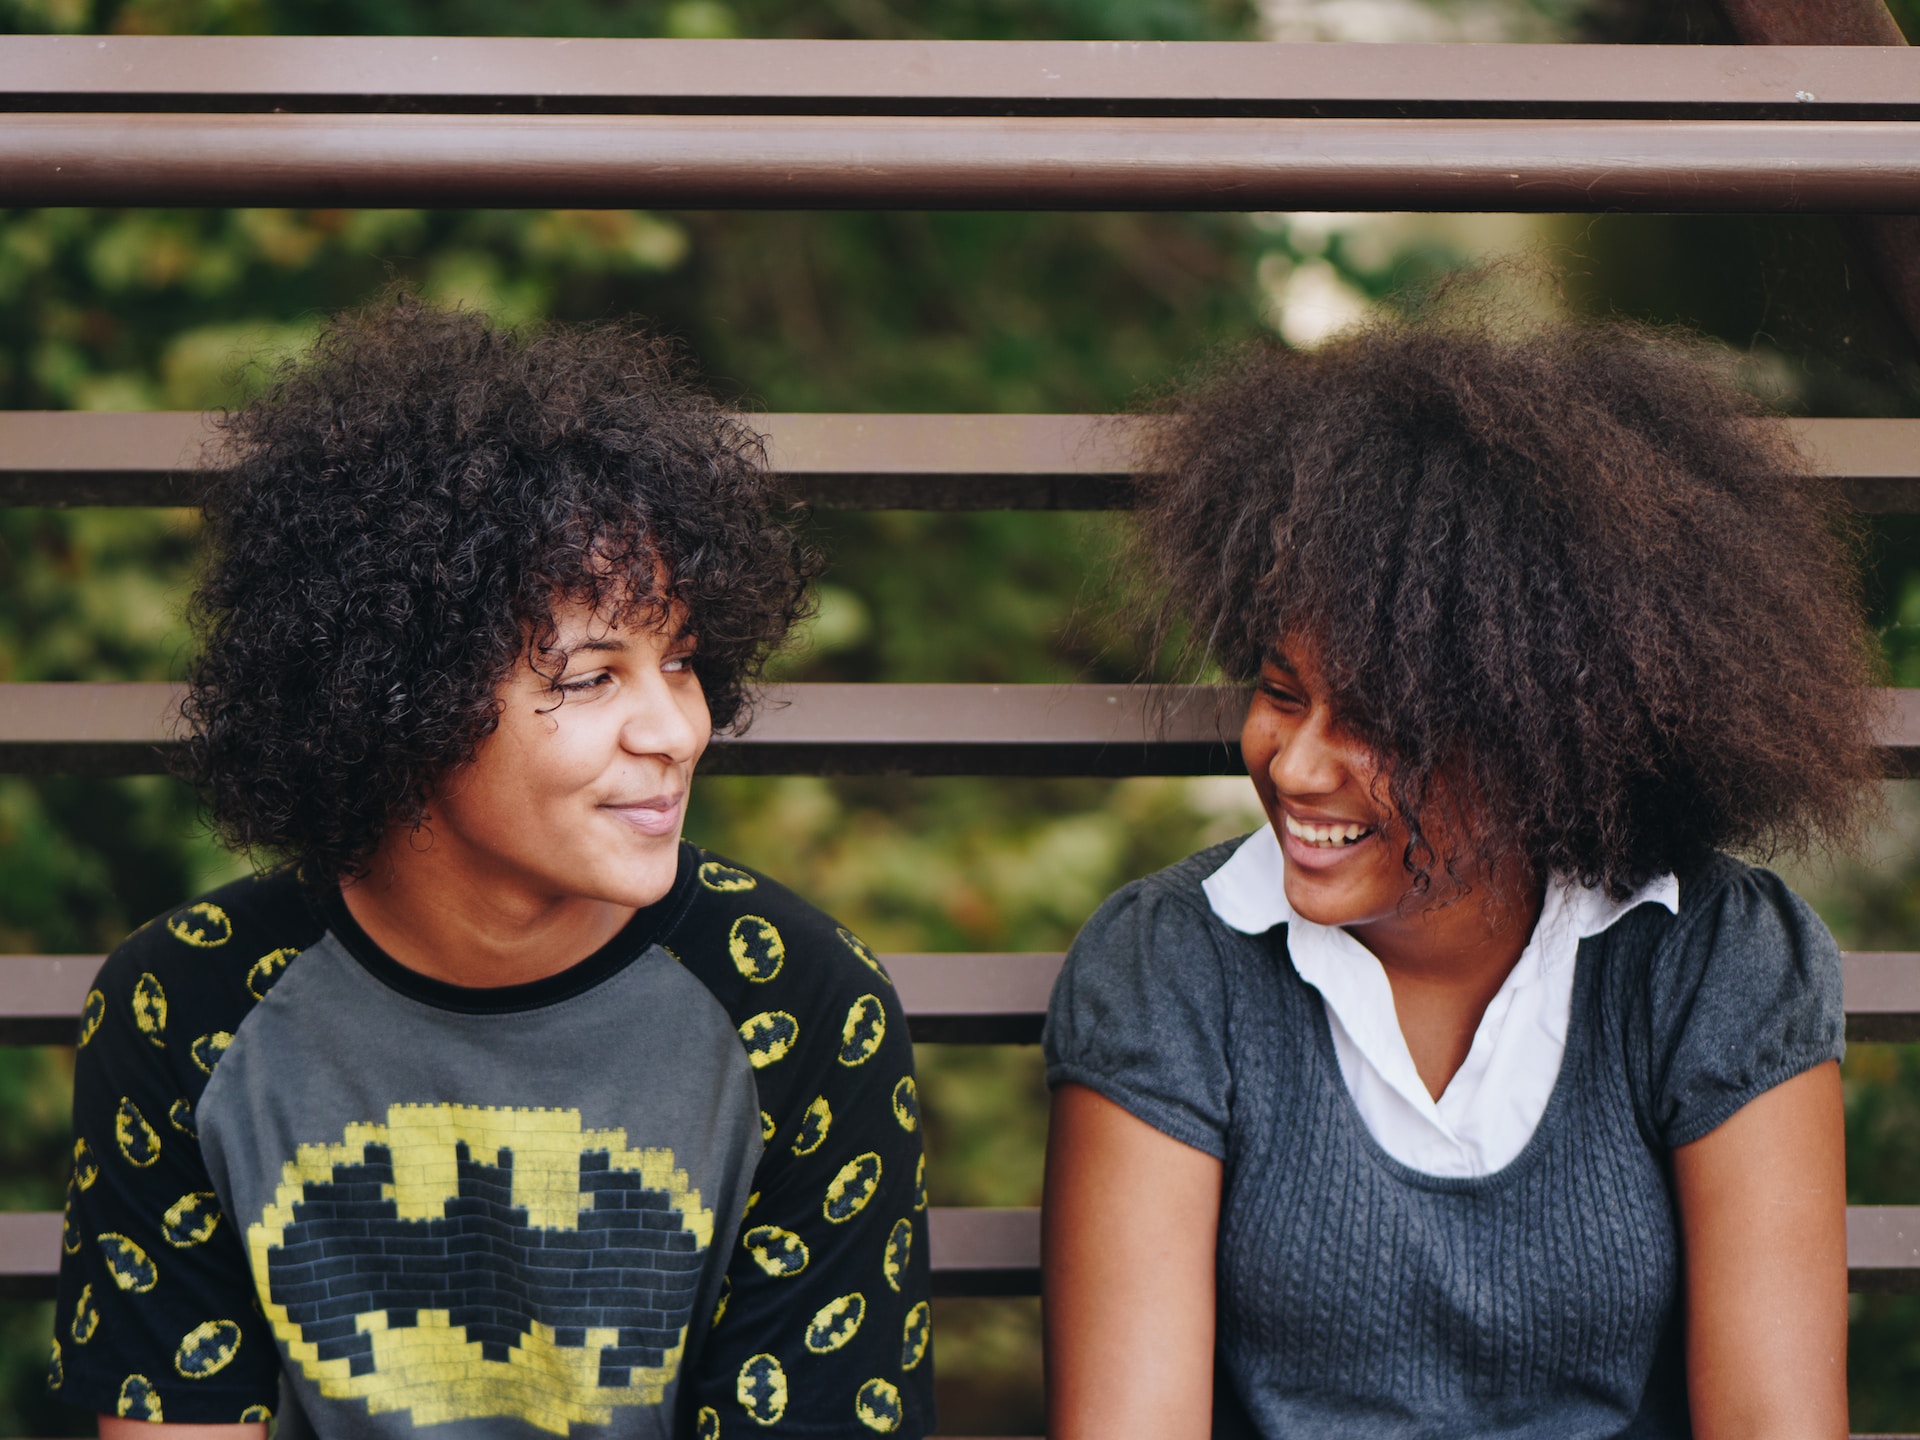 Two young black people sitting on a bench outdoors looking toward each other and smiling. One is wearing a grey top over a white shirt, the other is wearing a t-shirt with repeated batman symbols.